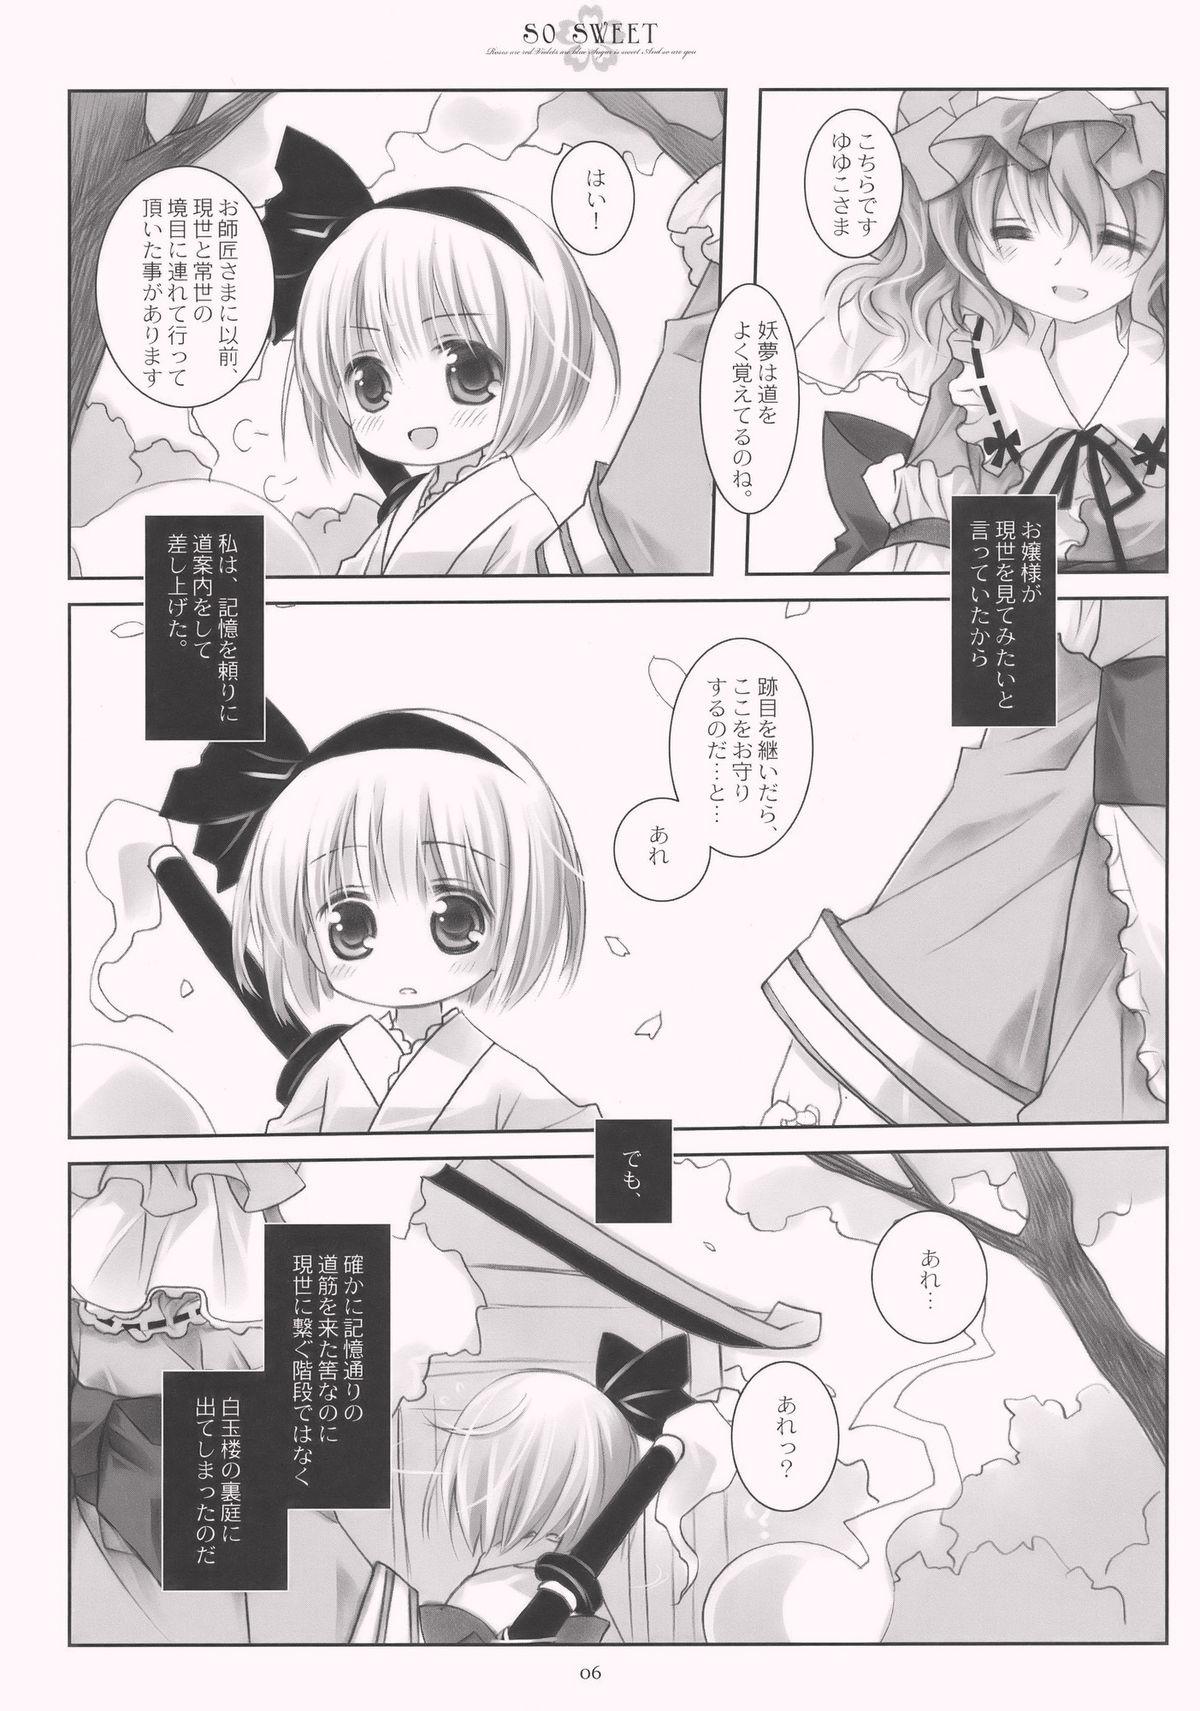 Livesex SO SWEET - Touhou project Asshole - Page 6